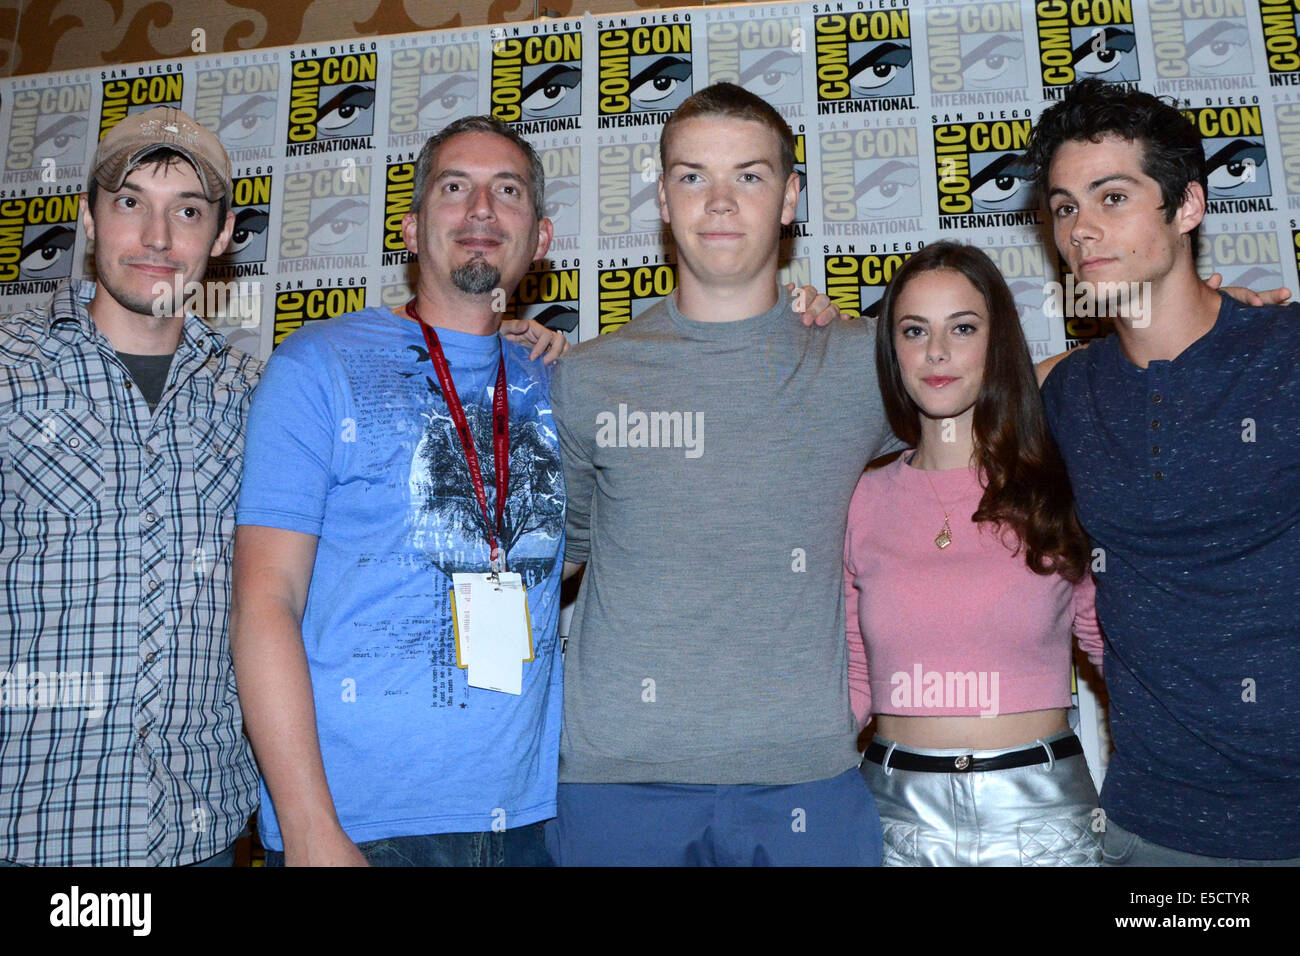 San Diego. 25th July, 2014. Wes Ball, James Dashner, Will Poulter, Kaya Scodelario and Dylan O'Brien attend a panel for the movie 'The Maze Runner' at the Diego Comic-Con International held at the San Diego Convention Center on July 25, 2014 in San Diego. © dpa/Alamy Live News Stock Photo